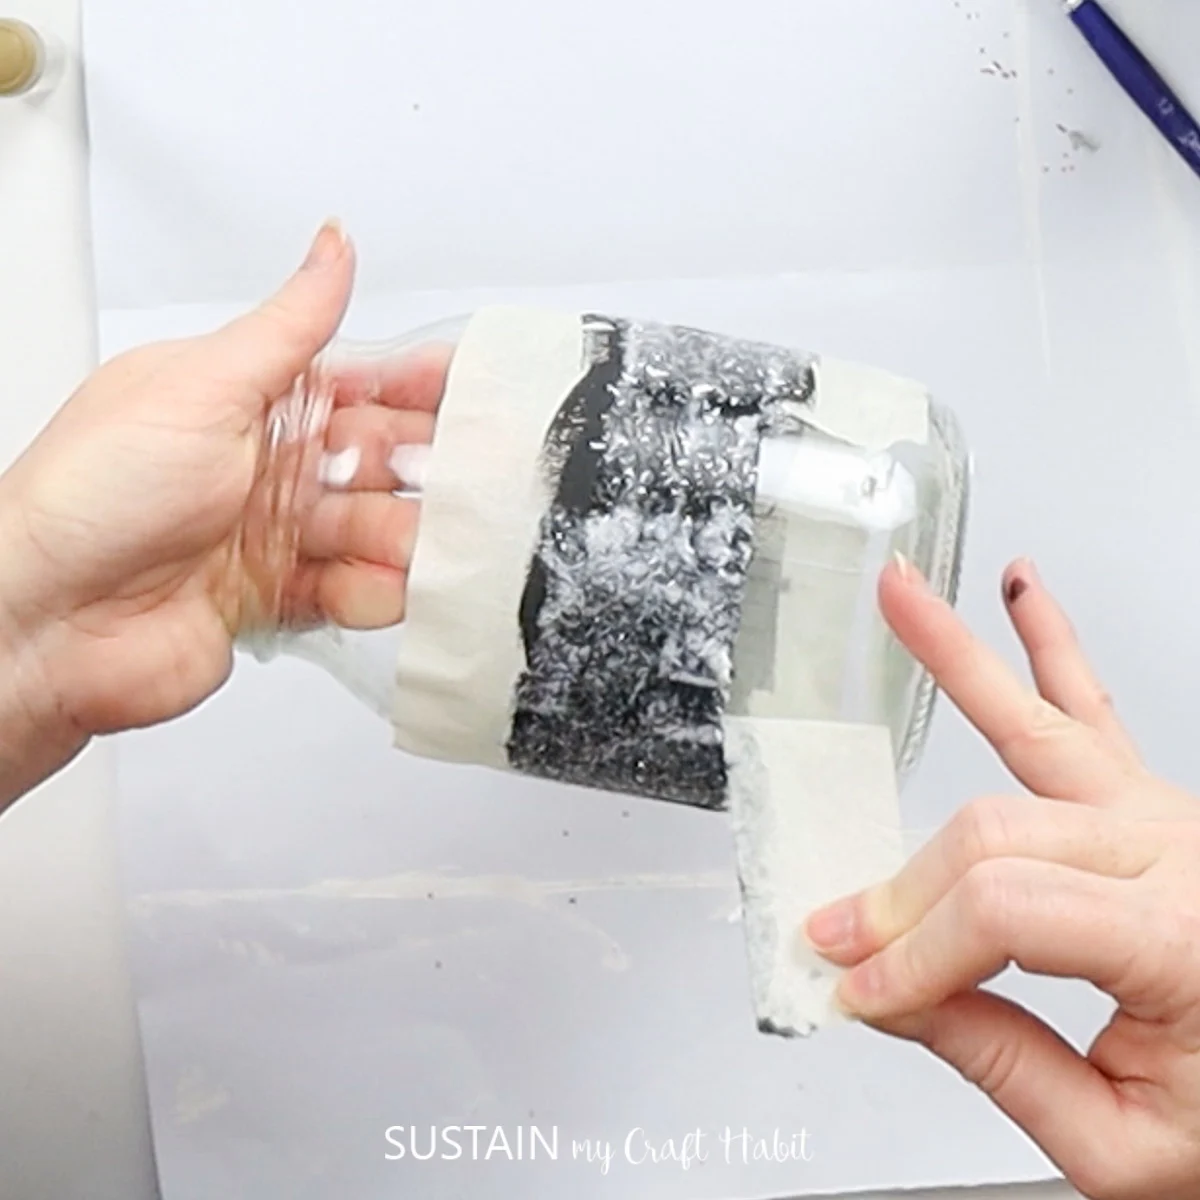 Removing tape from a jar.